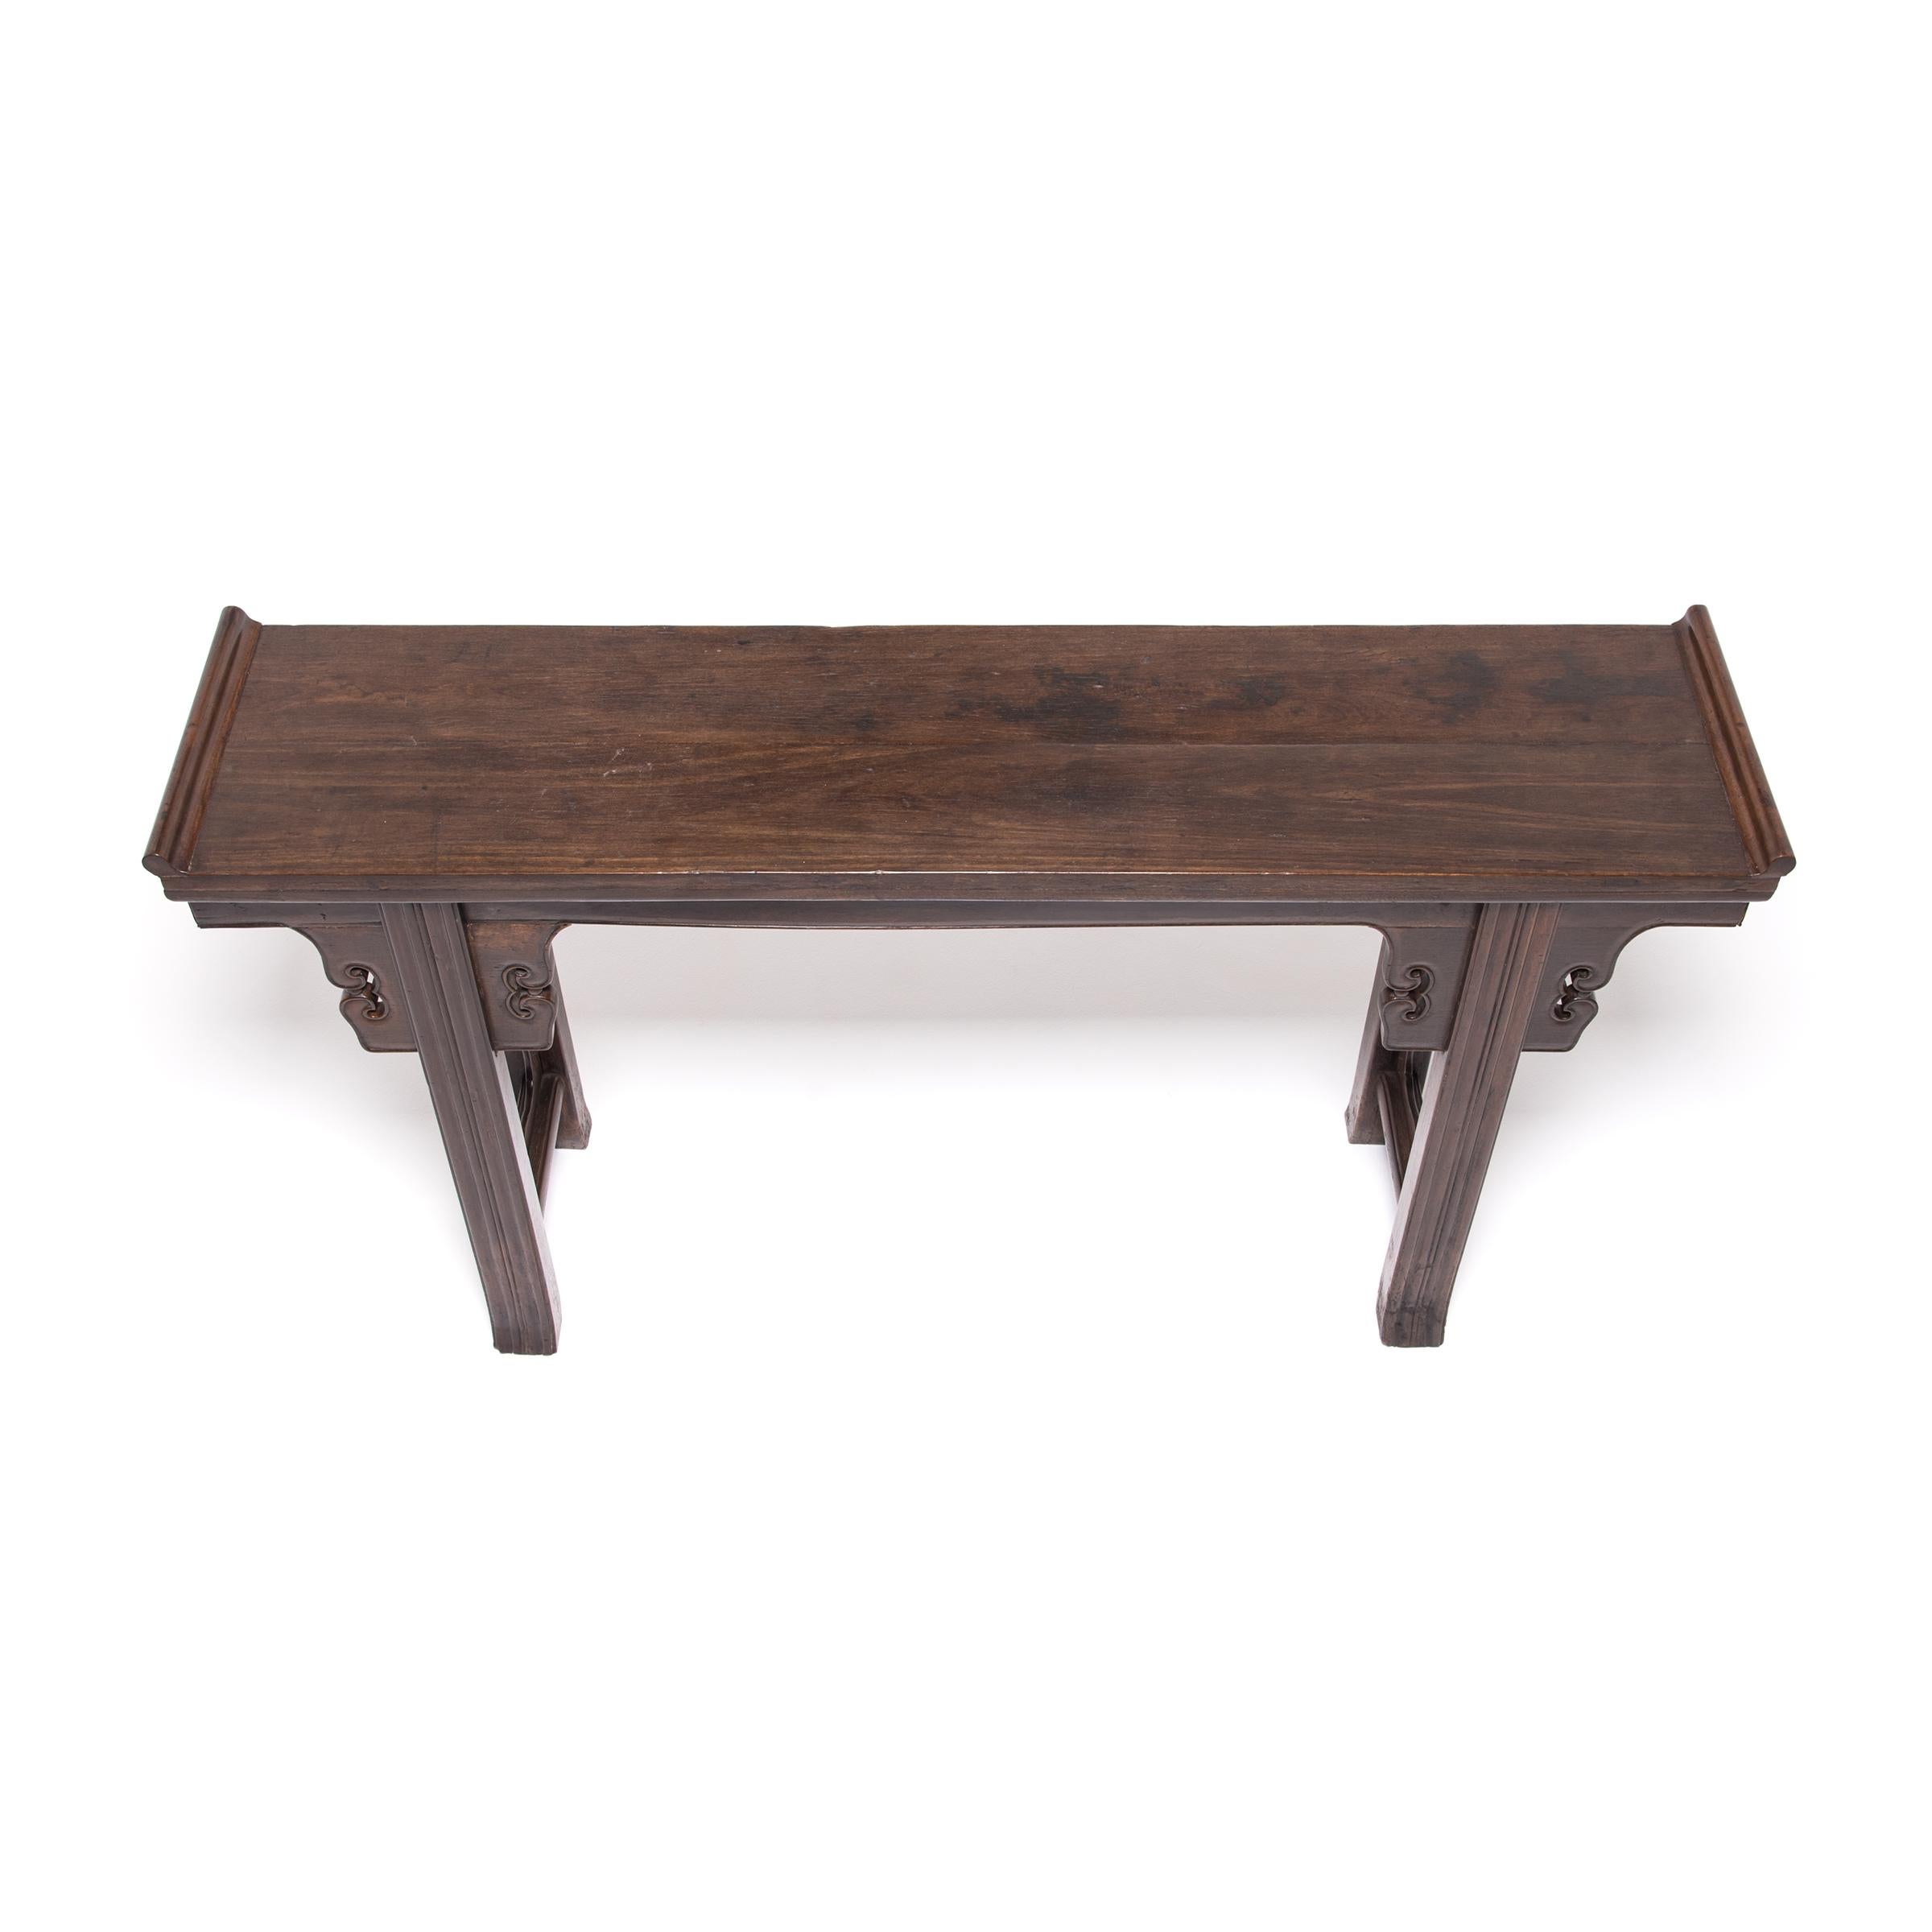 Carved Chinese Altar Table with Everted Ends, c. 1850 For Sale